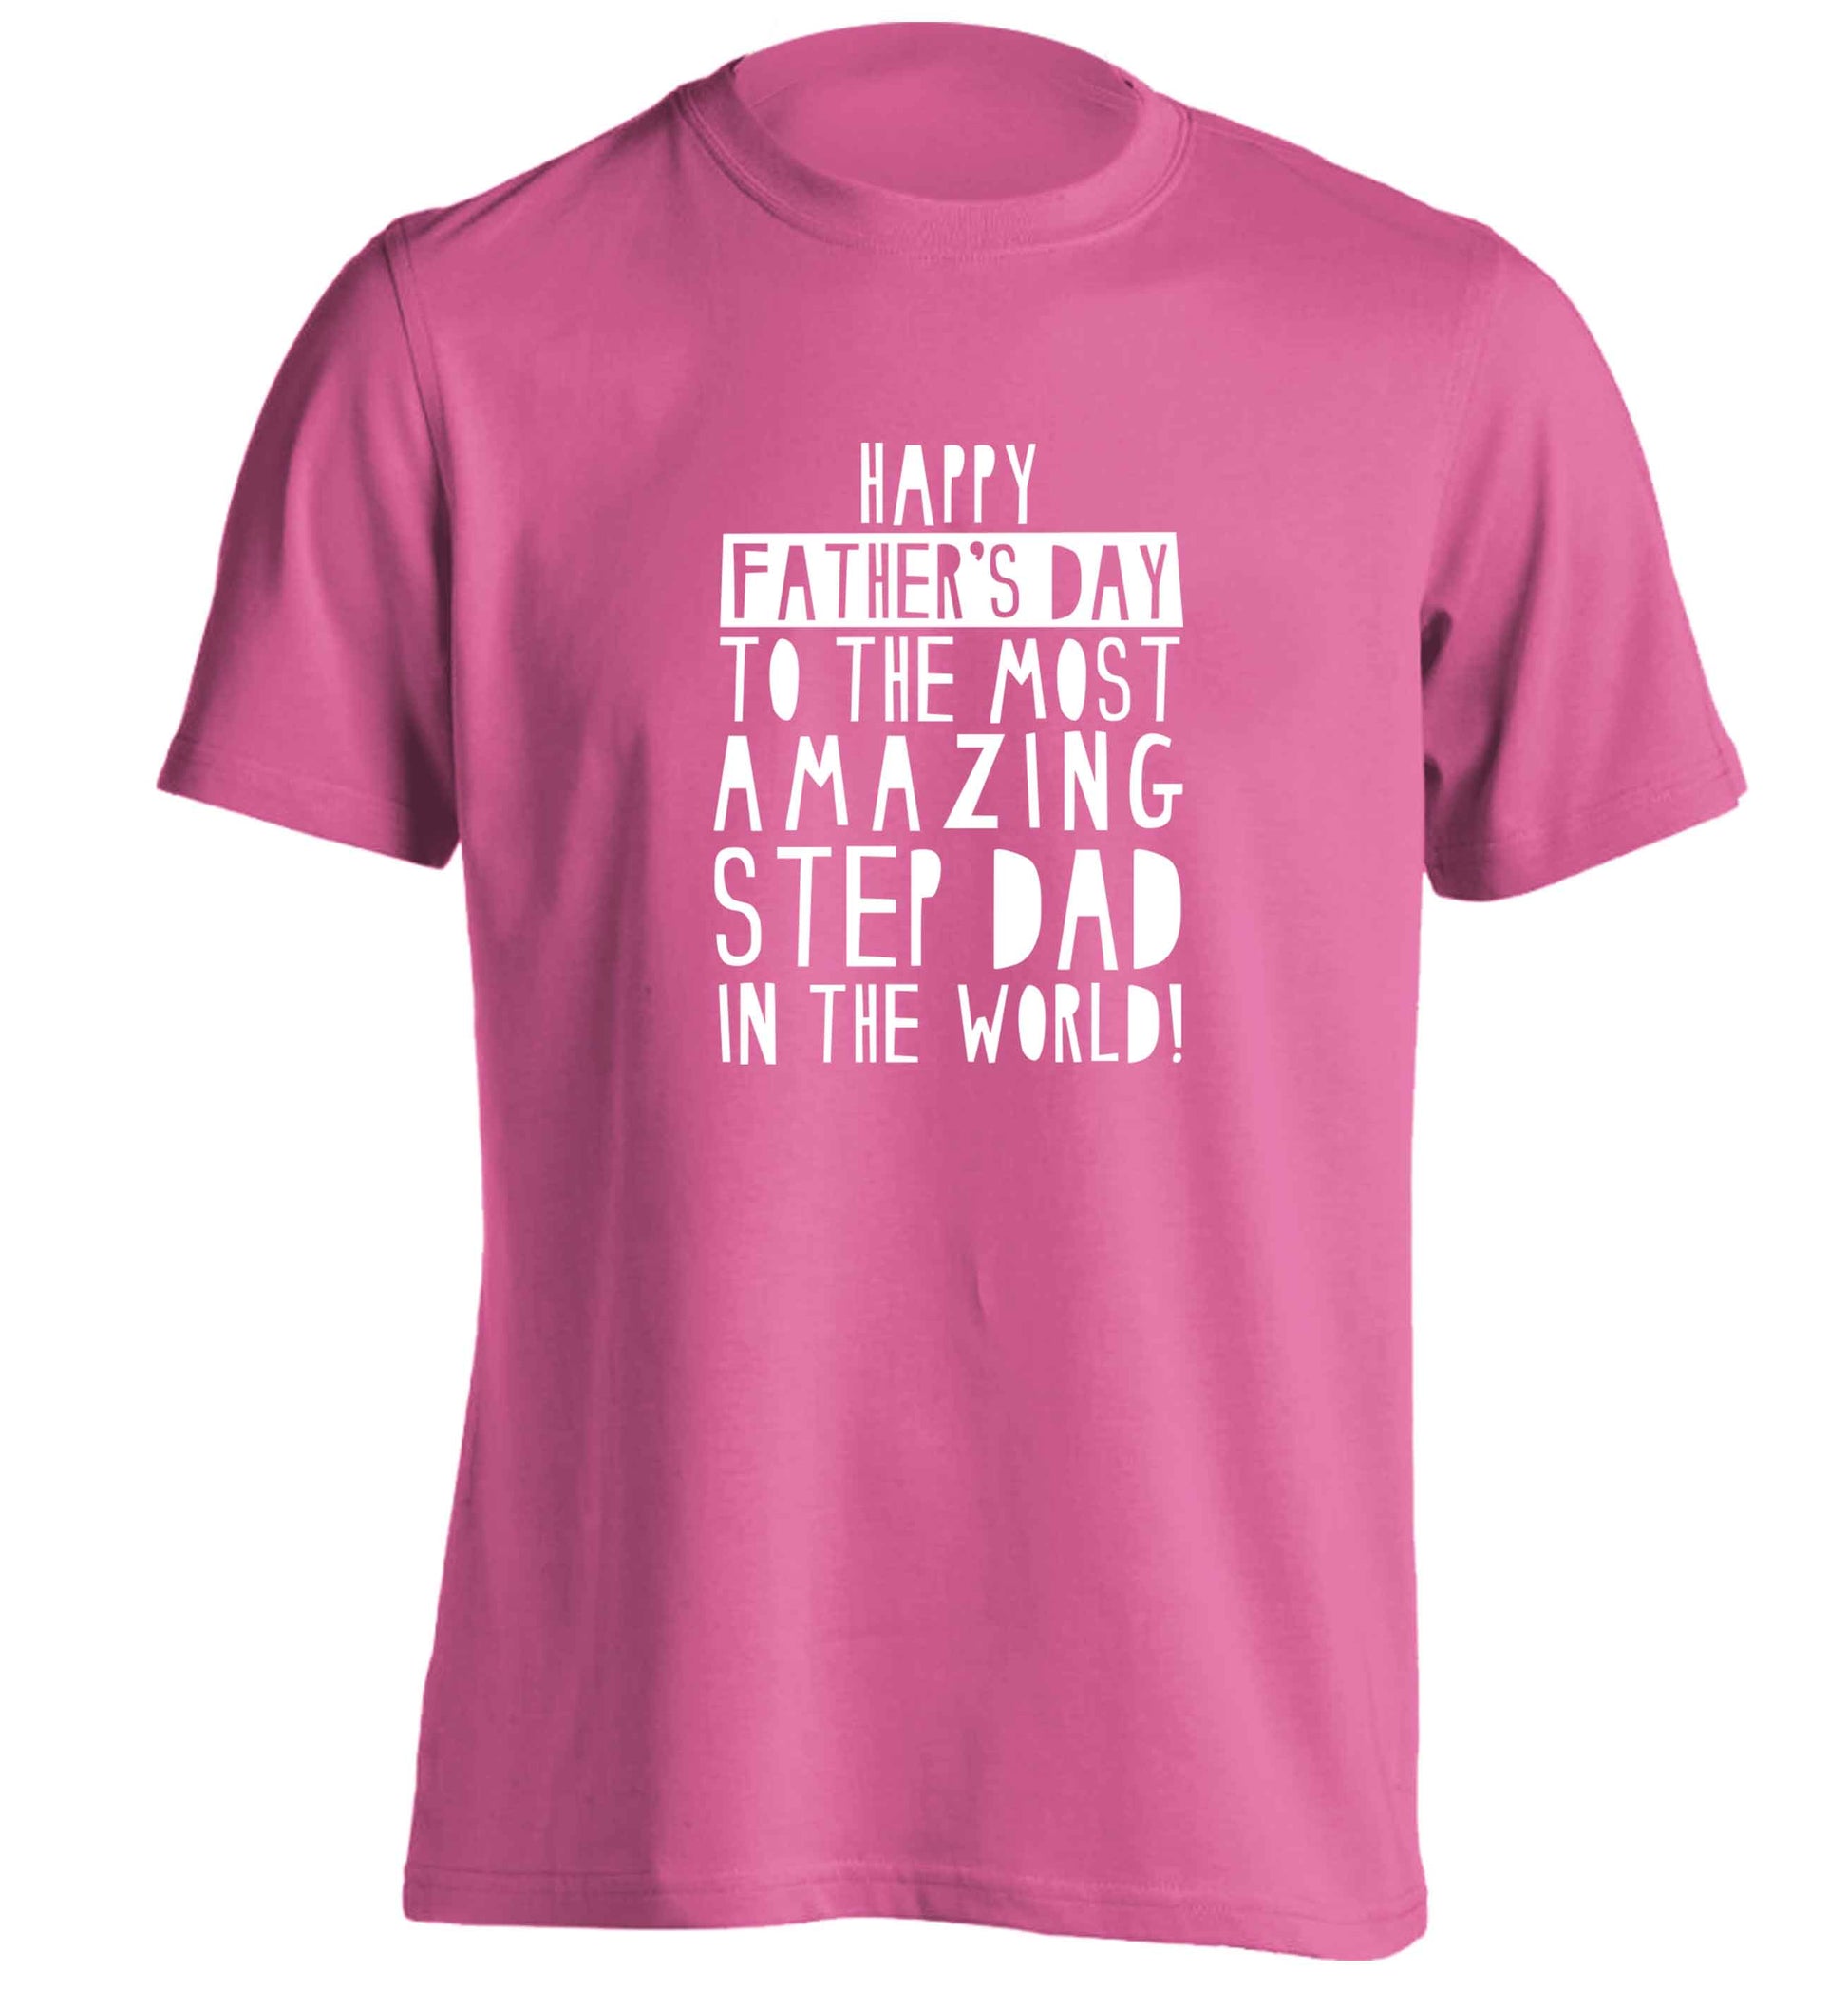 Happy Father's day to the best step dad in the world adults unisex pink Tshirt 2XL